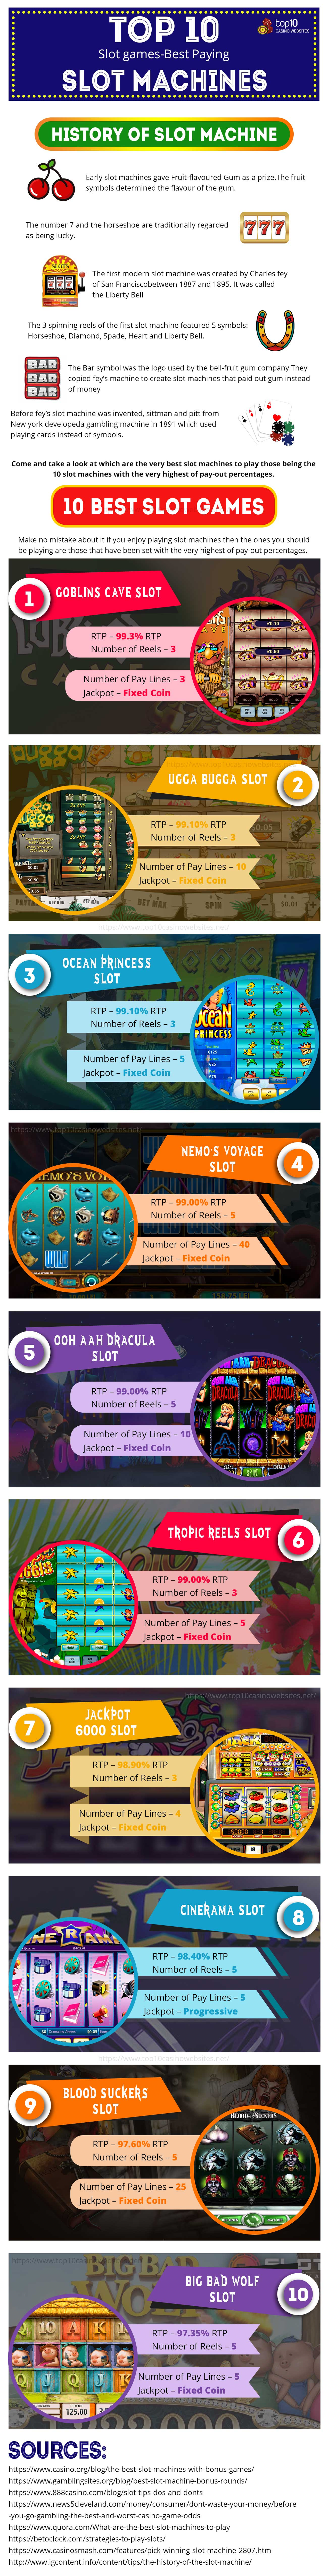 Infographic on 10 Best Slot Games